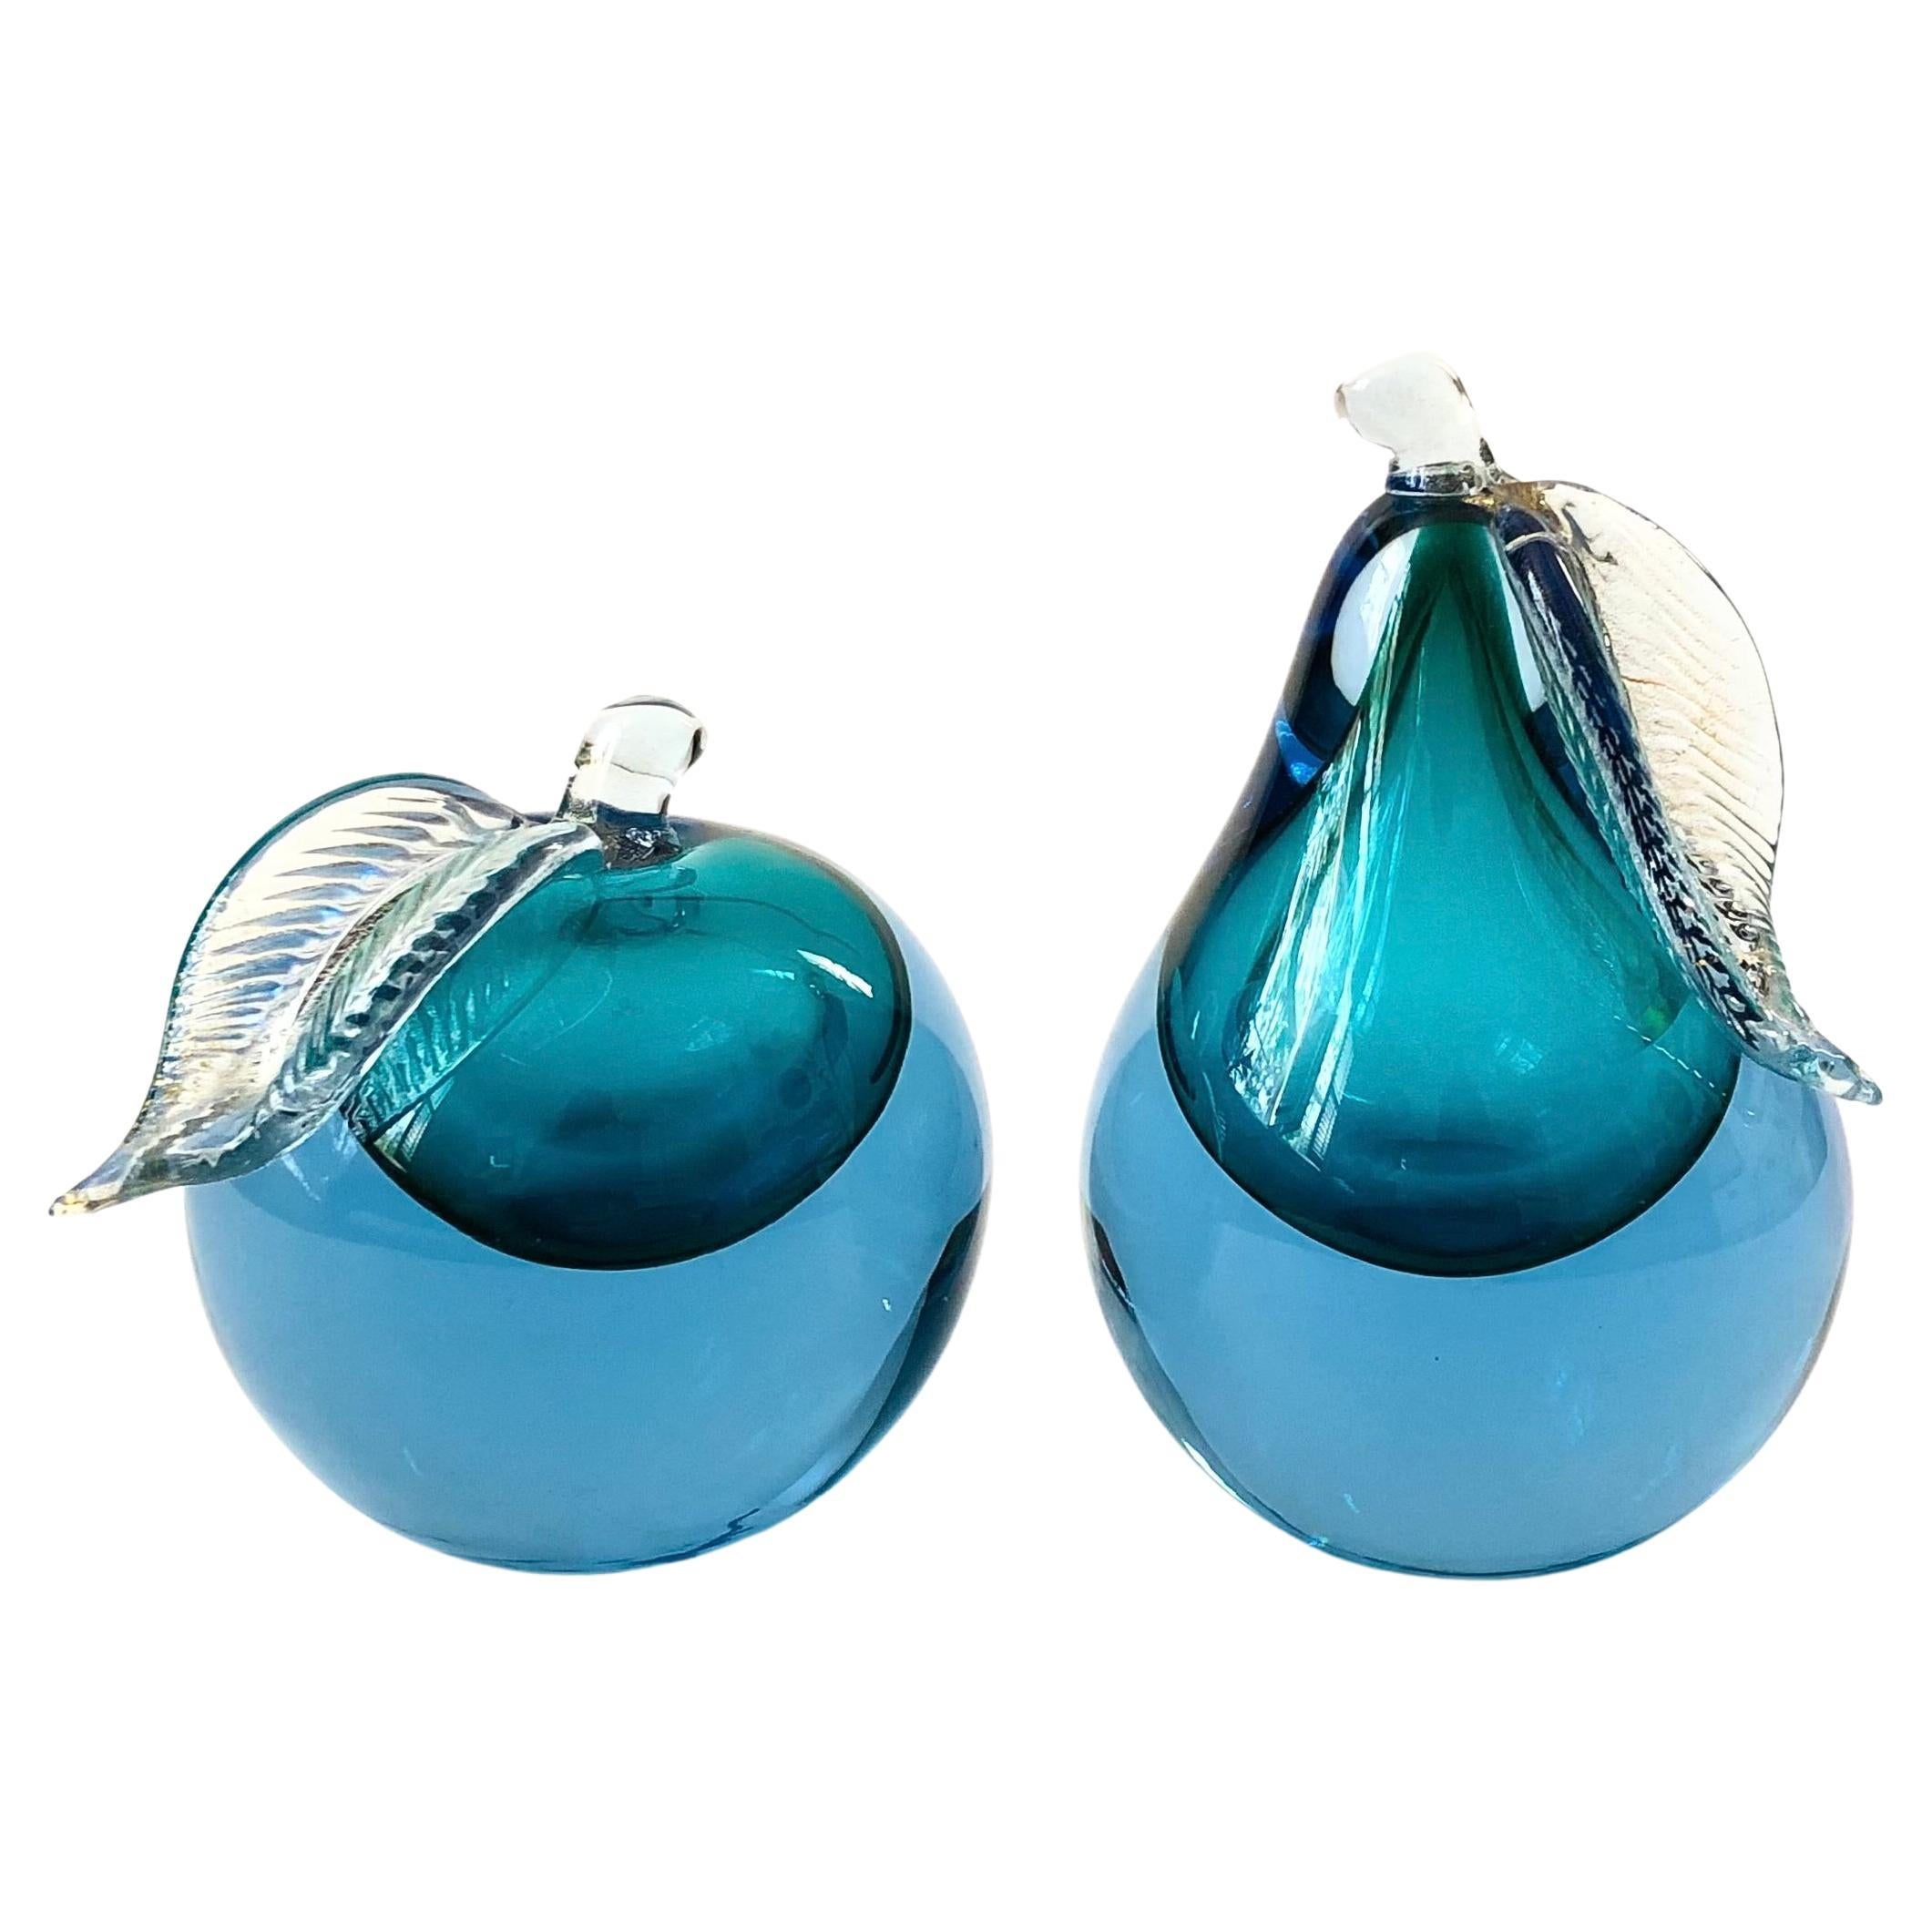 Mid Century Murano Sommerso Art Glass Apple and Pear Bookends by Alfredo Barbini